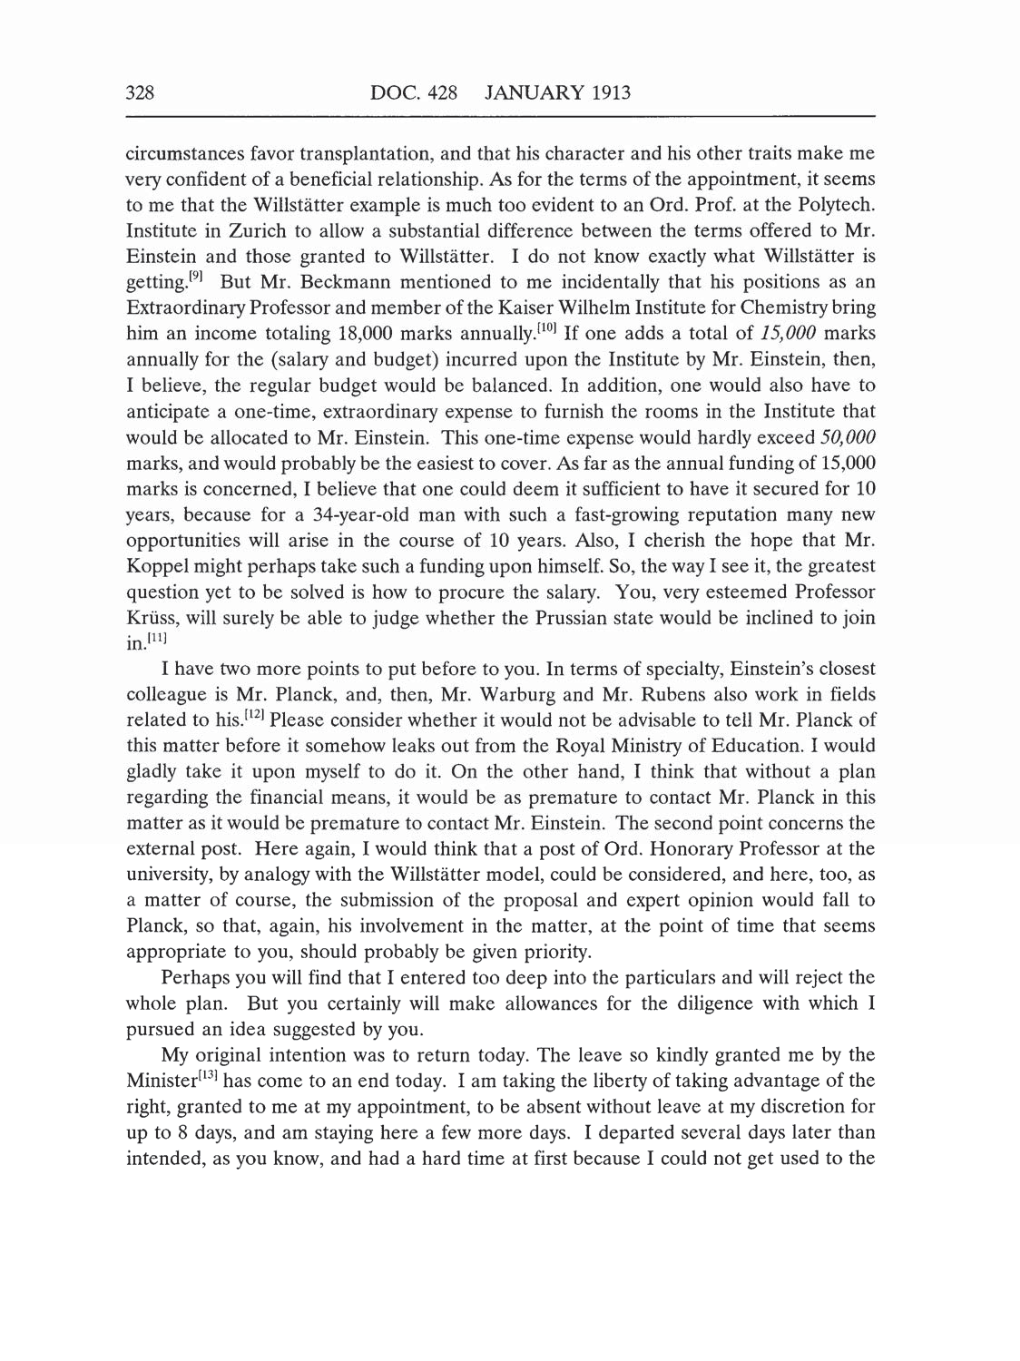 Volume 5: The Swiss Years: Correspondence, 1902-1914 (English translation supplement) page 328